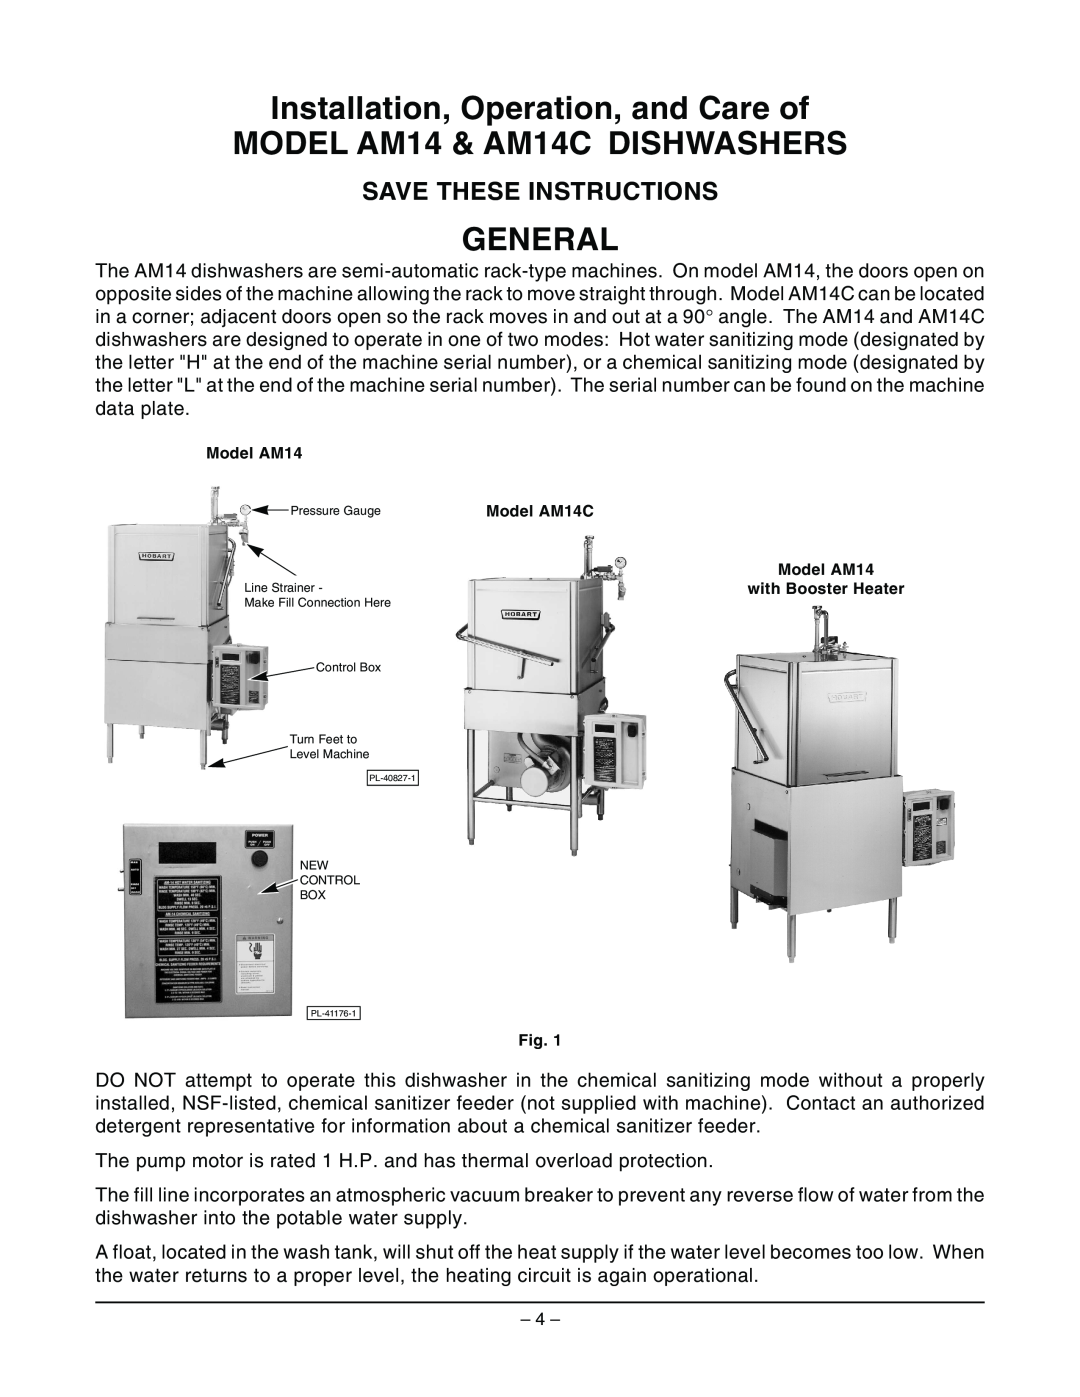 Hobart AM14C ML-32615, AM14 ML-32614 manual Installation, Operation, and Care of, MODEL AM14 & AM14C DISHWASHERS, General 